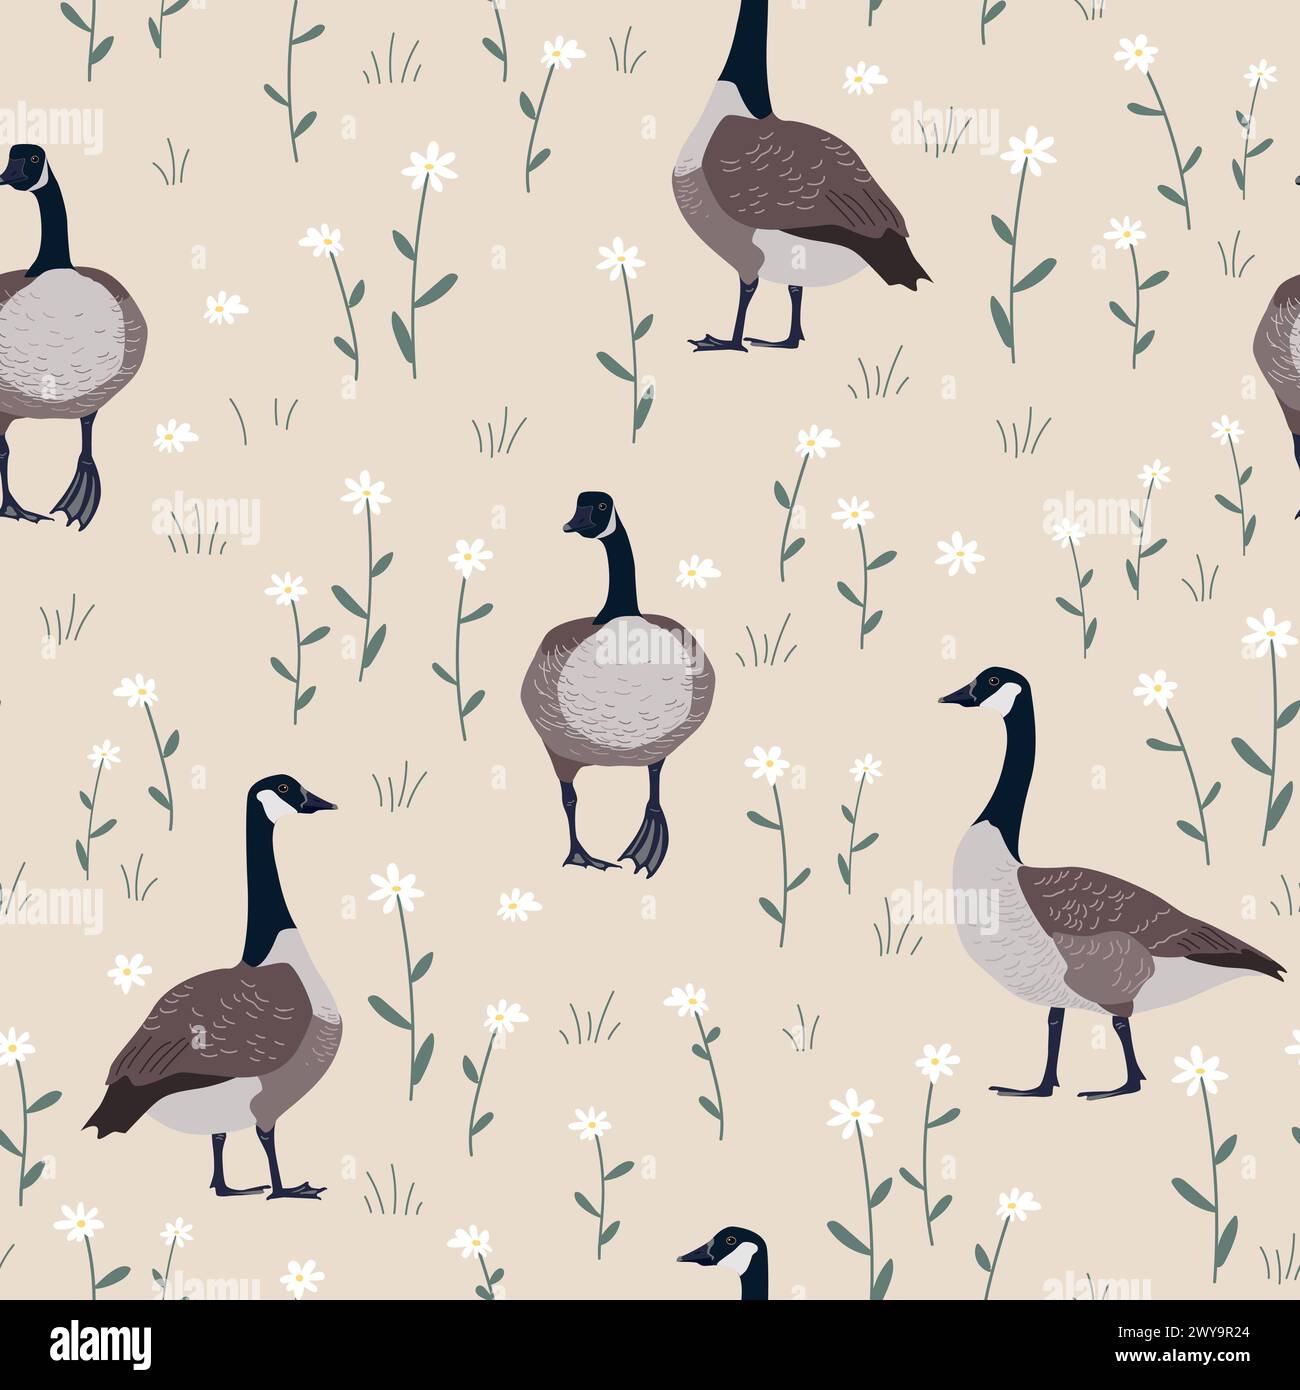 Seamless pattern with daisy flower and Canada geese birds. Small white flowers and green leaves on beige background. Cute floral print. Vector Stock Vector